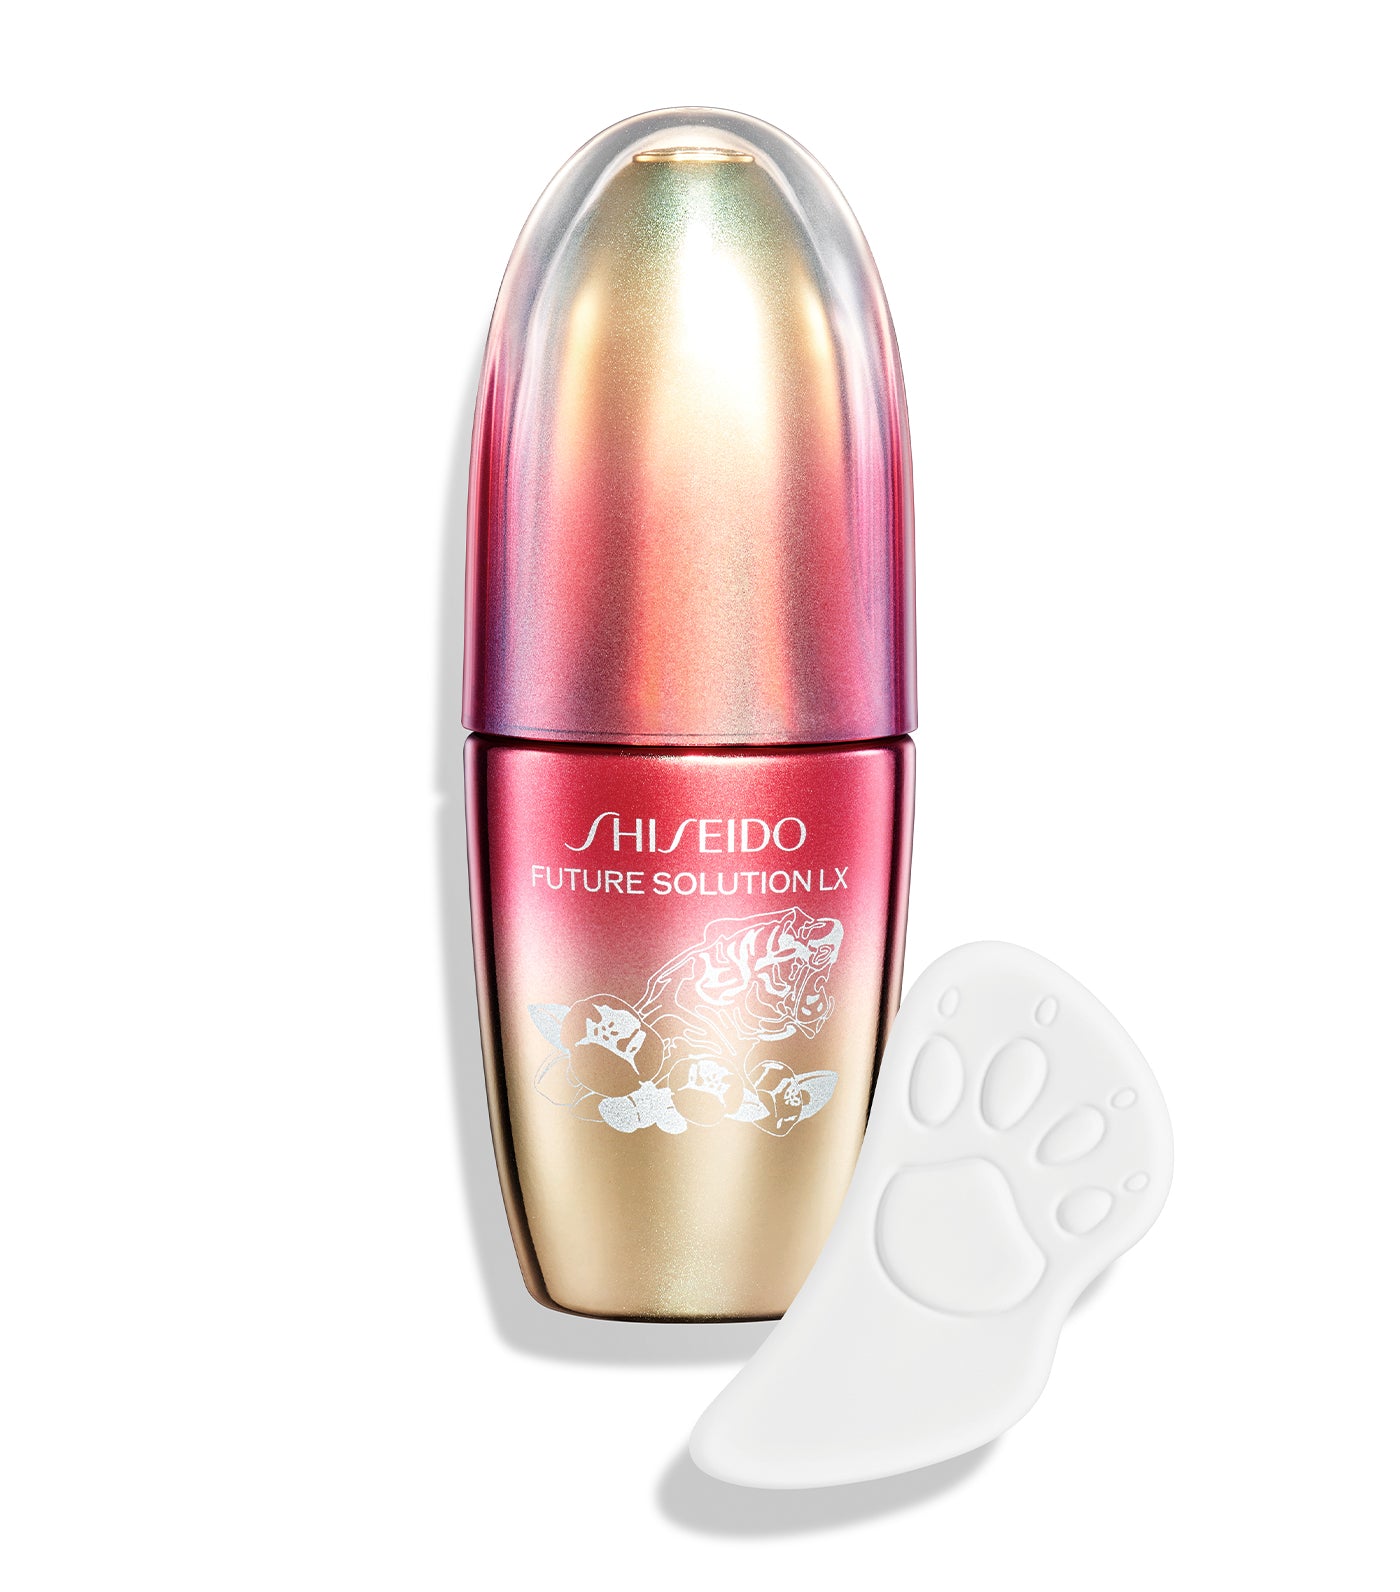 Future Solution LX Legendary Enmei Ultimate Luminance Serum - Angel Chen Limited Edition